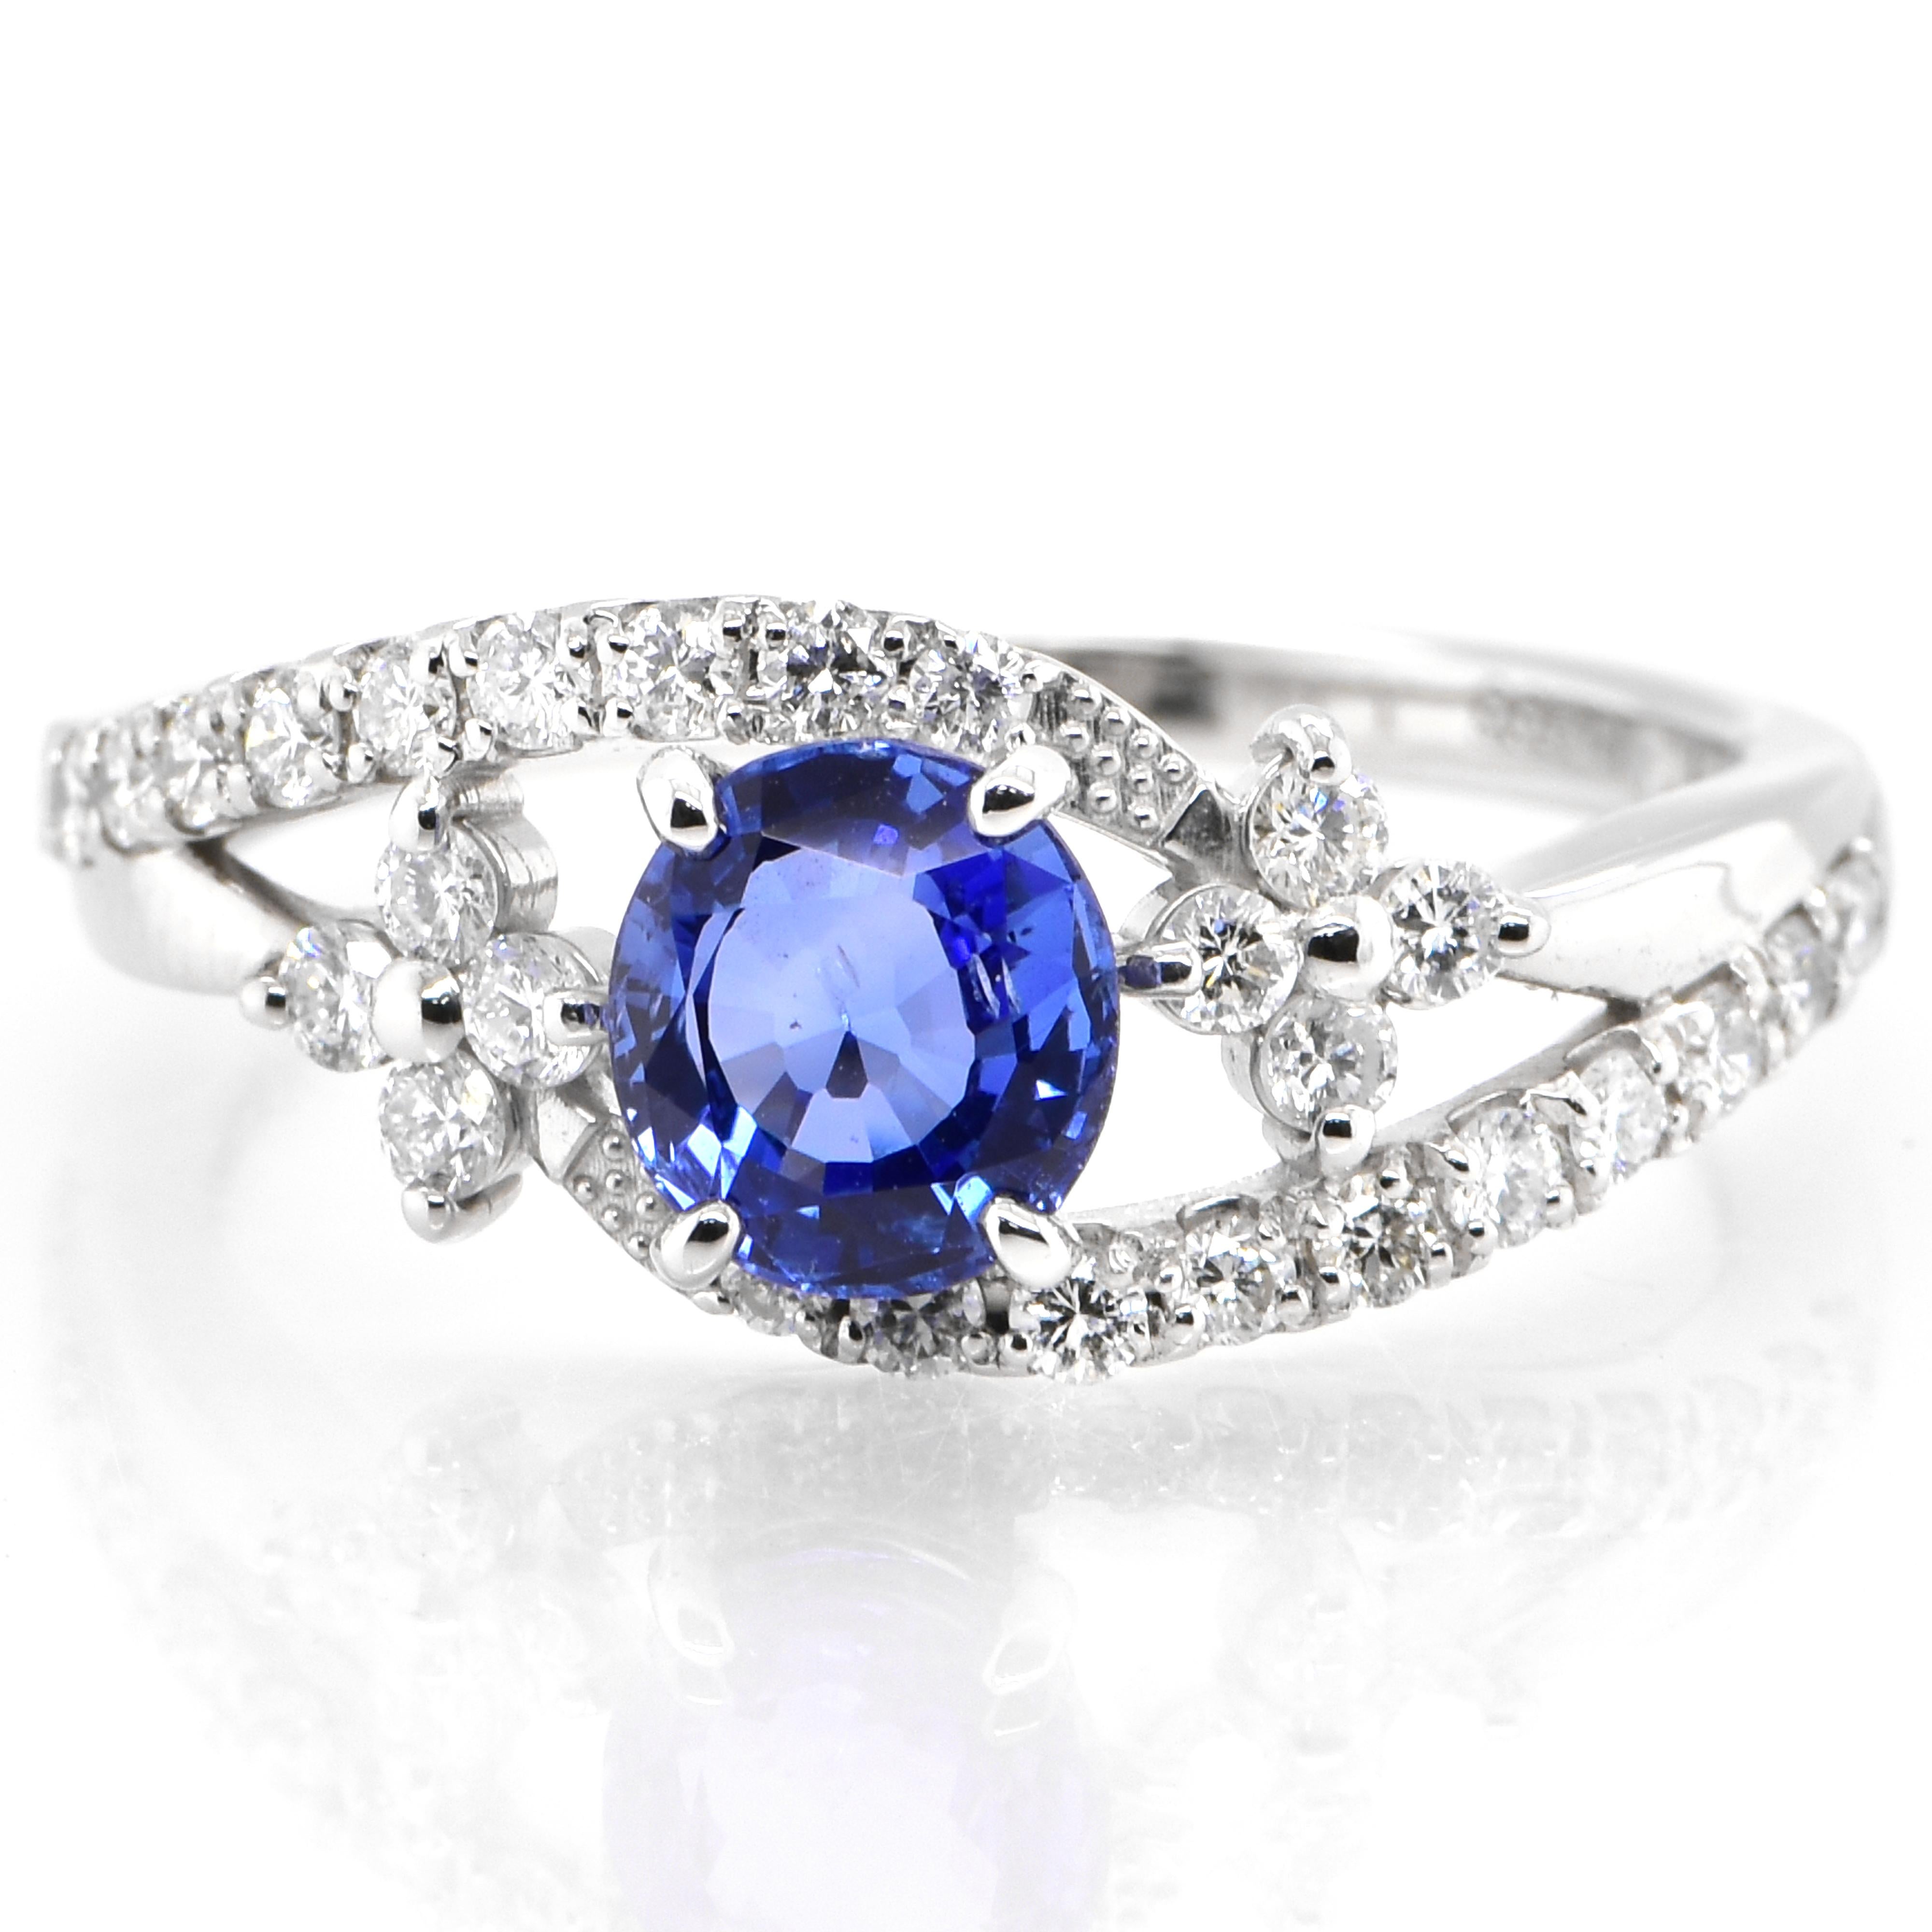 A beautiful ring featuring 1.09 Carat Natural, Unheated, Burmese Blue Sapphire and 0.42 Carats Diamond Accents set in Platinum. Sapphires have extraordinary durability - they excel in hardness as well as toughness and durability making them very